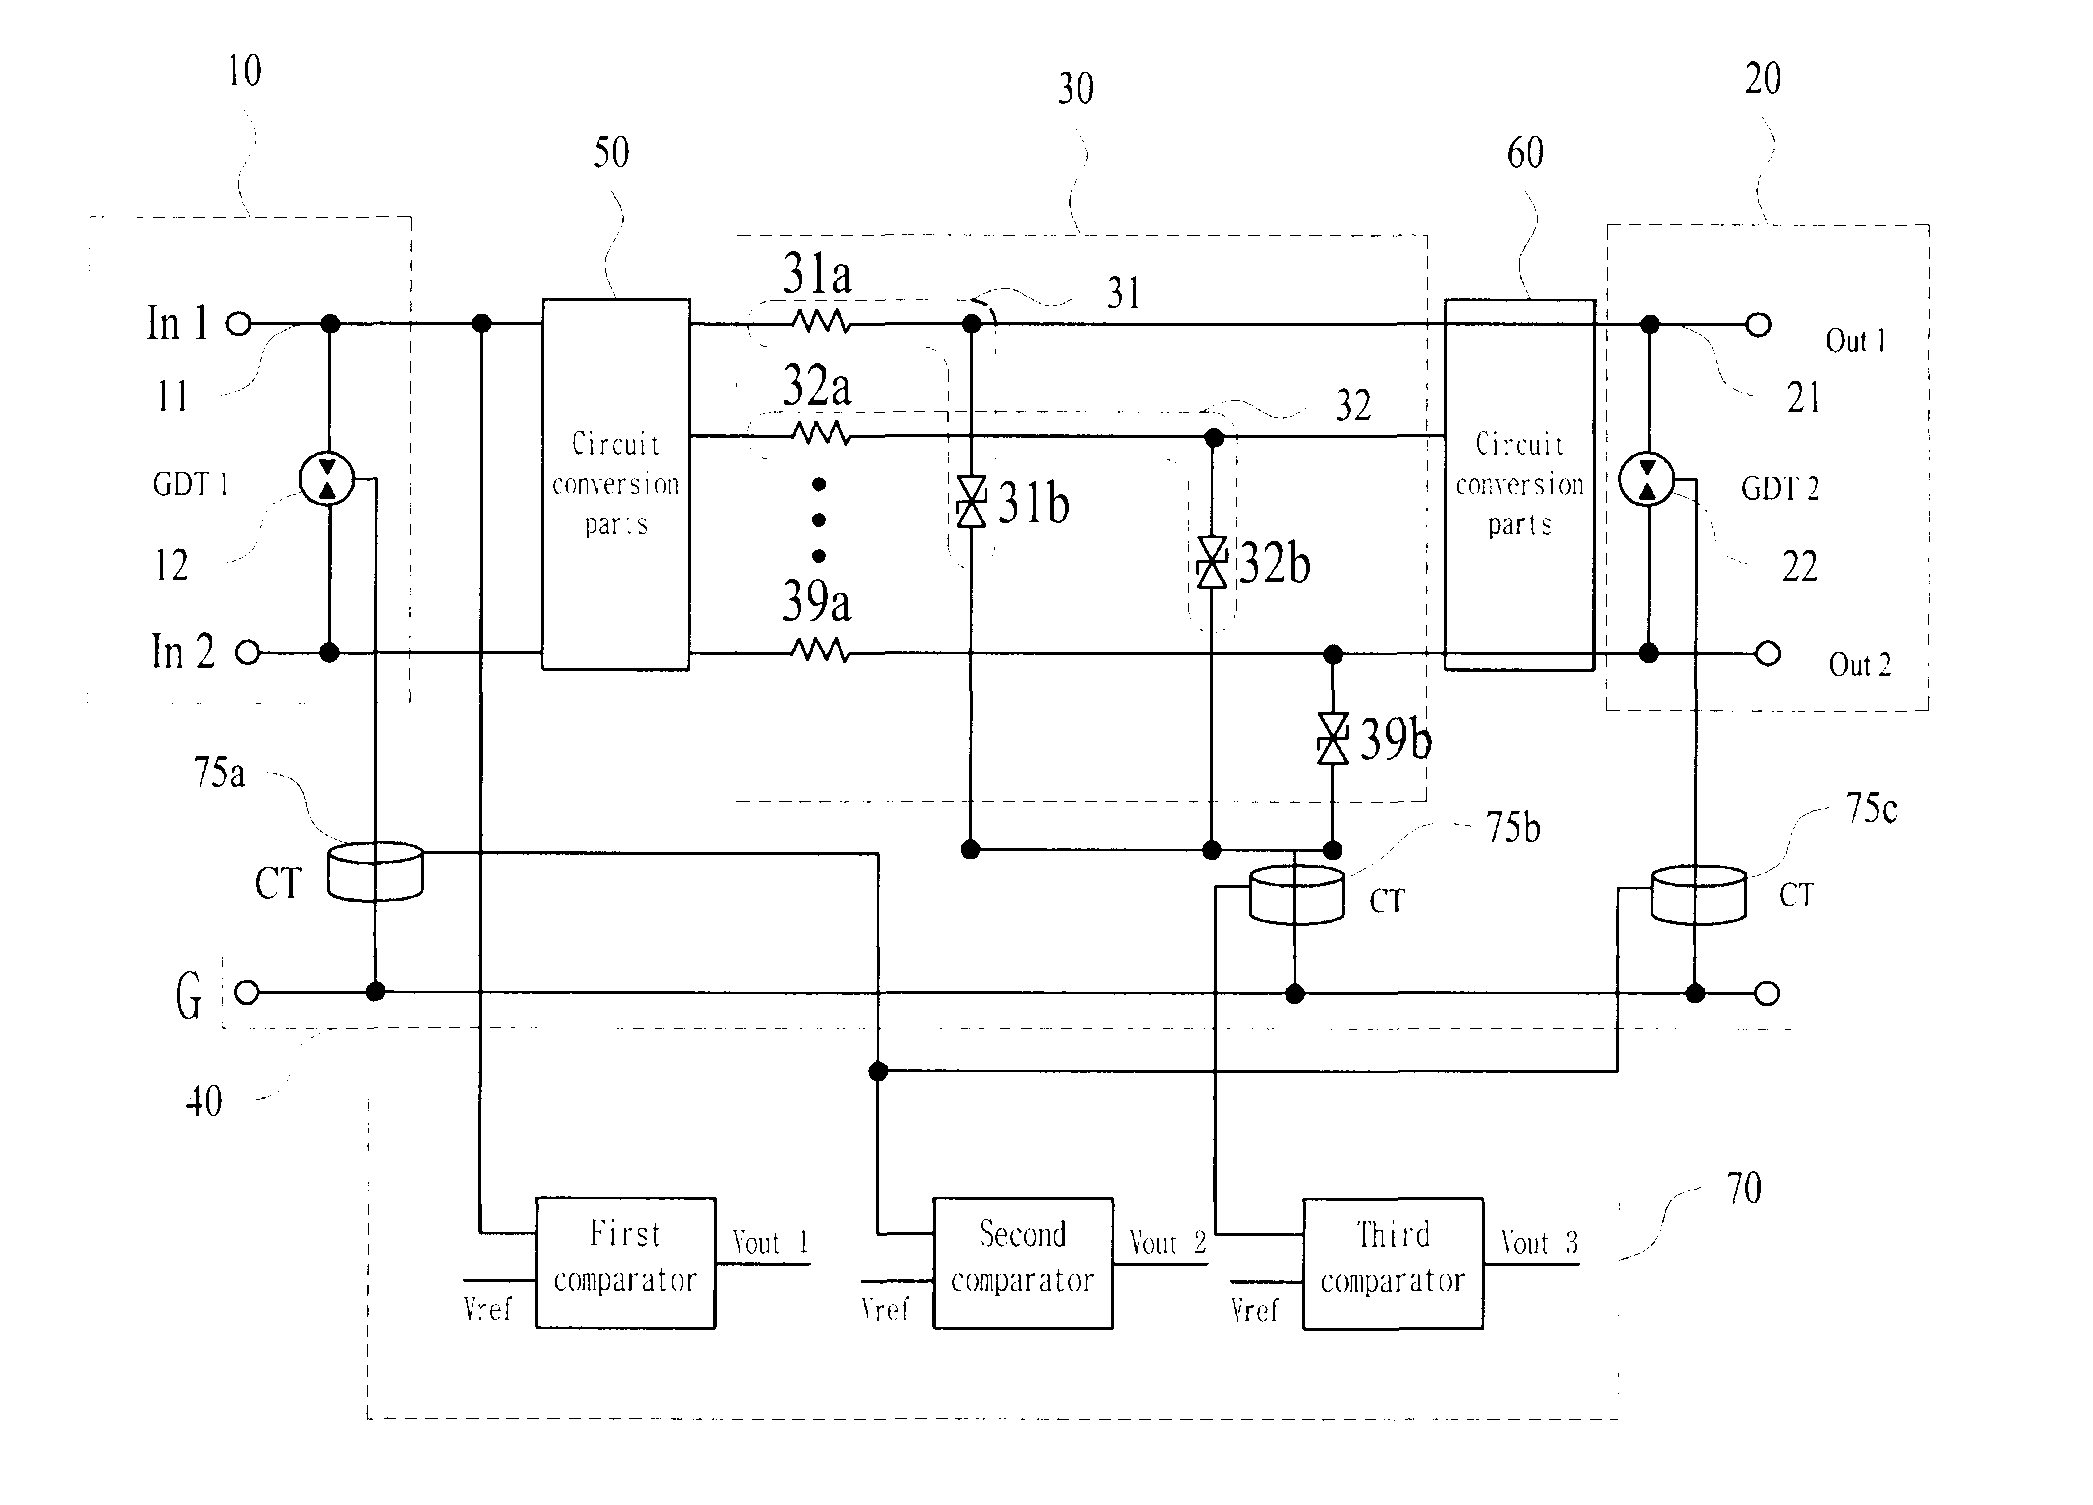 Surge protection device for multi-protection mode communications